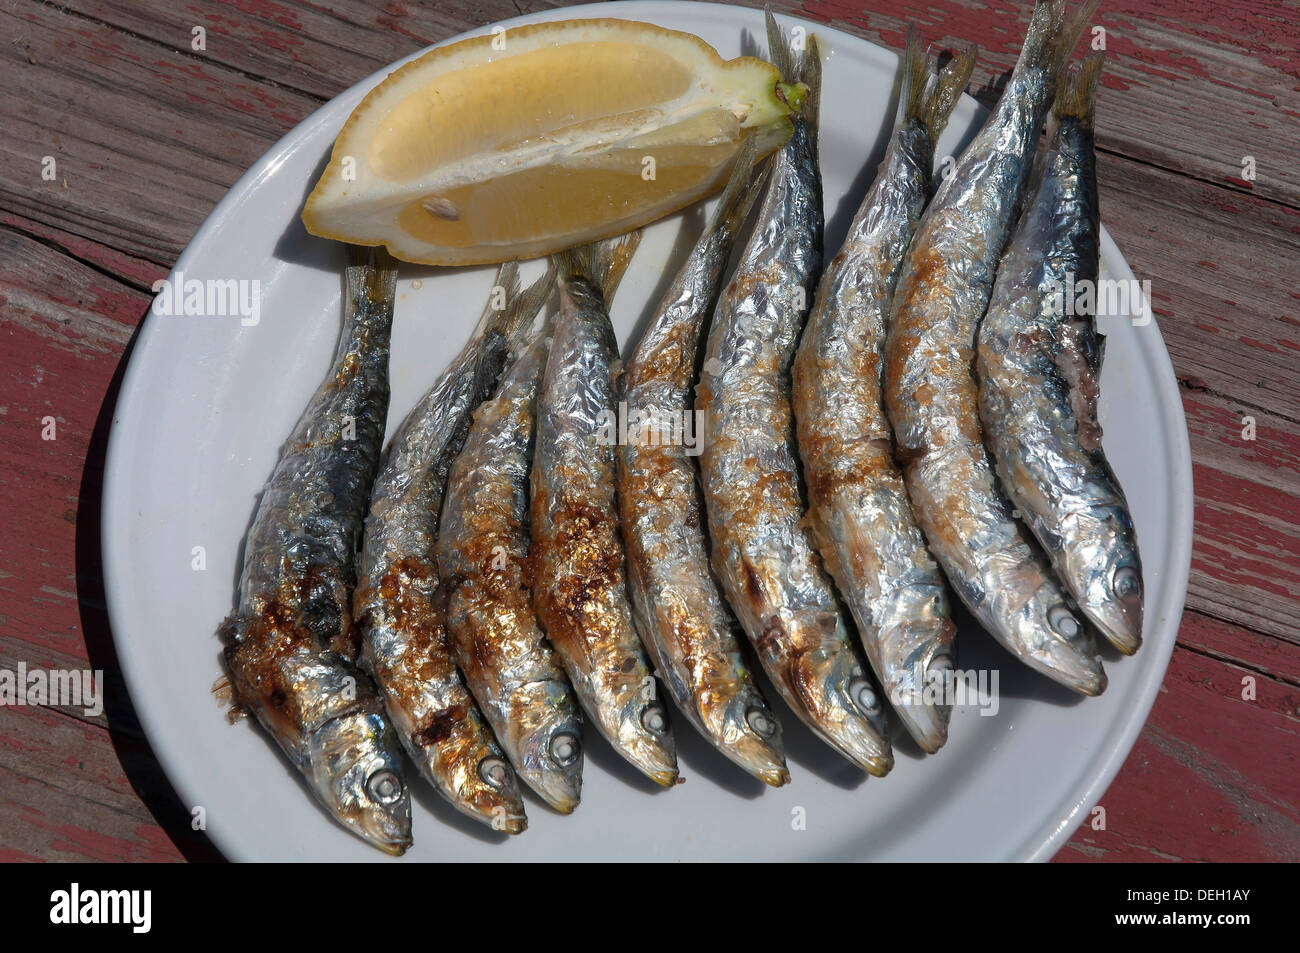 Grilled sardines, Torre del Mar beach, Malaga-province, Andalusia, Spain, Europe Stock Photo